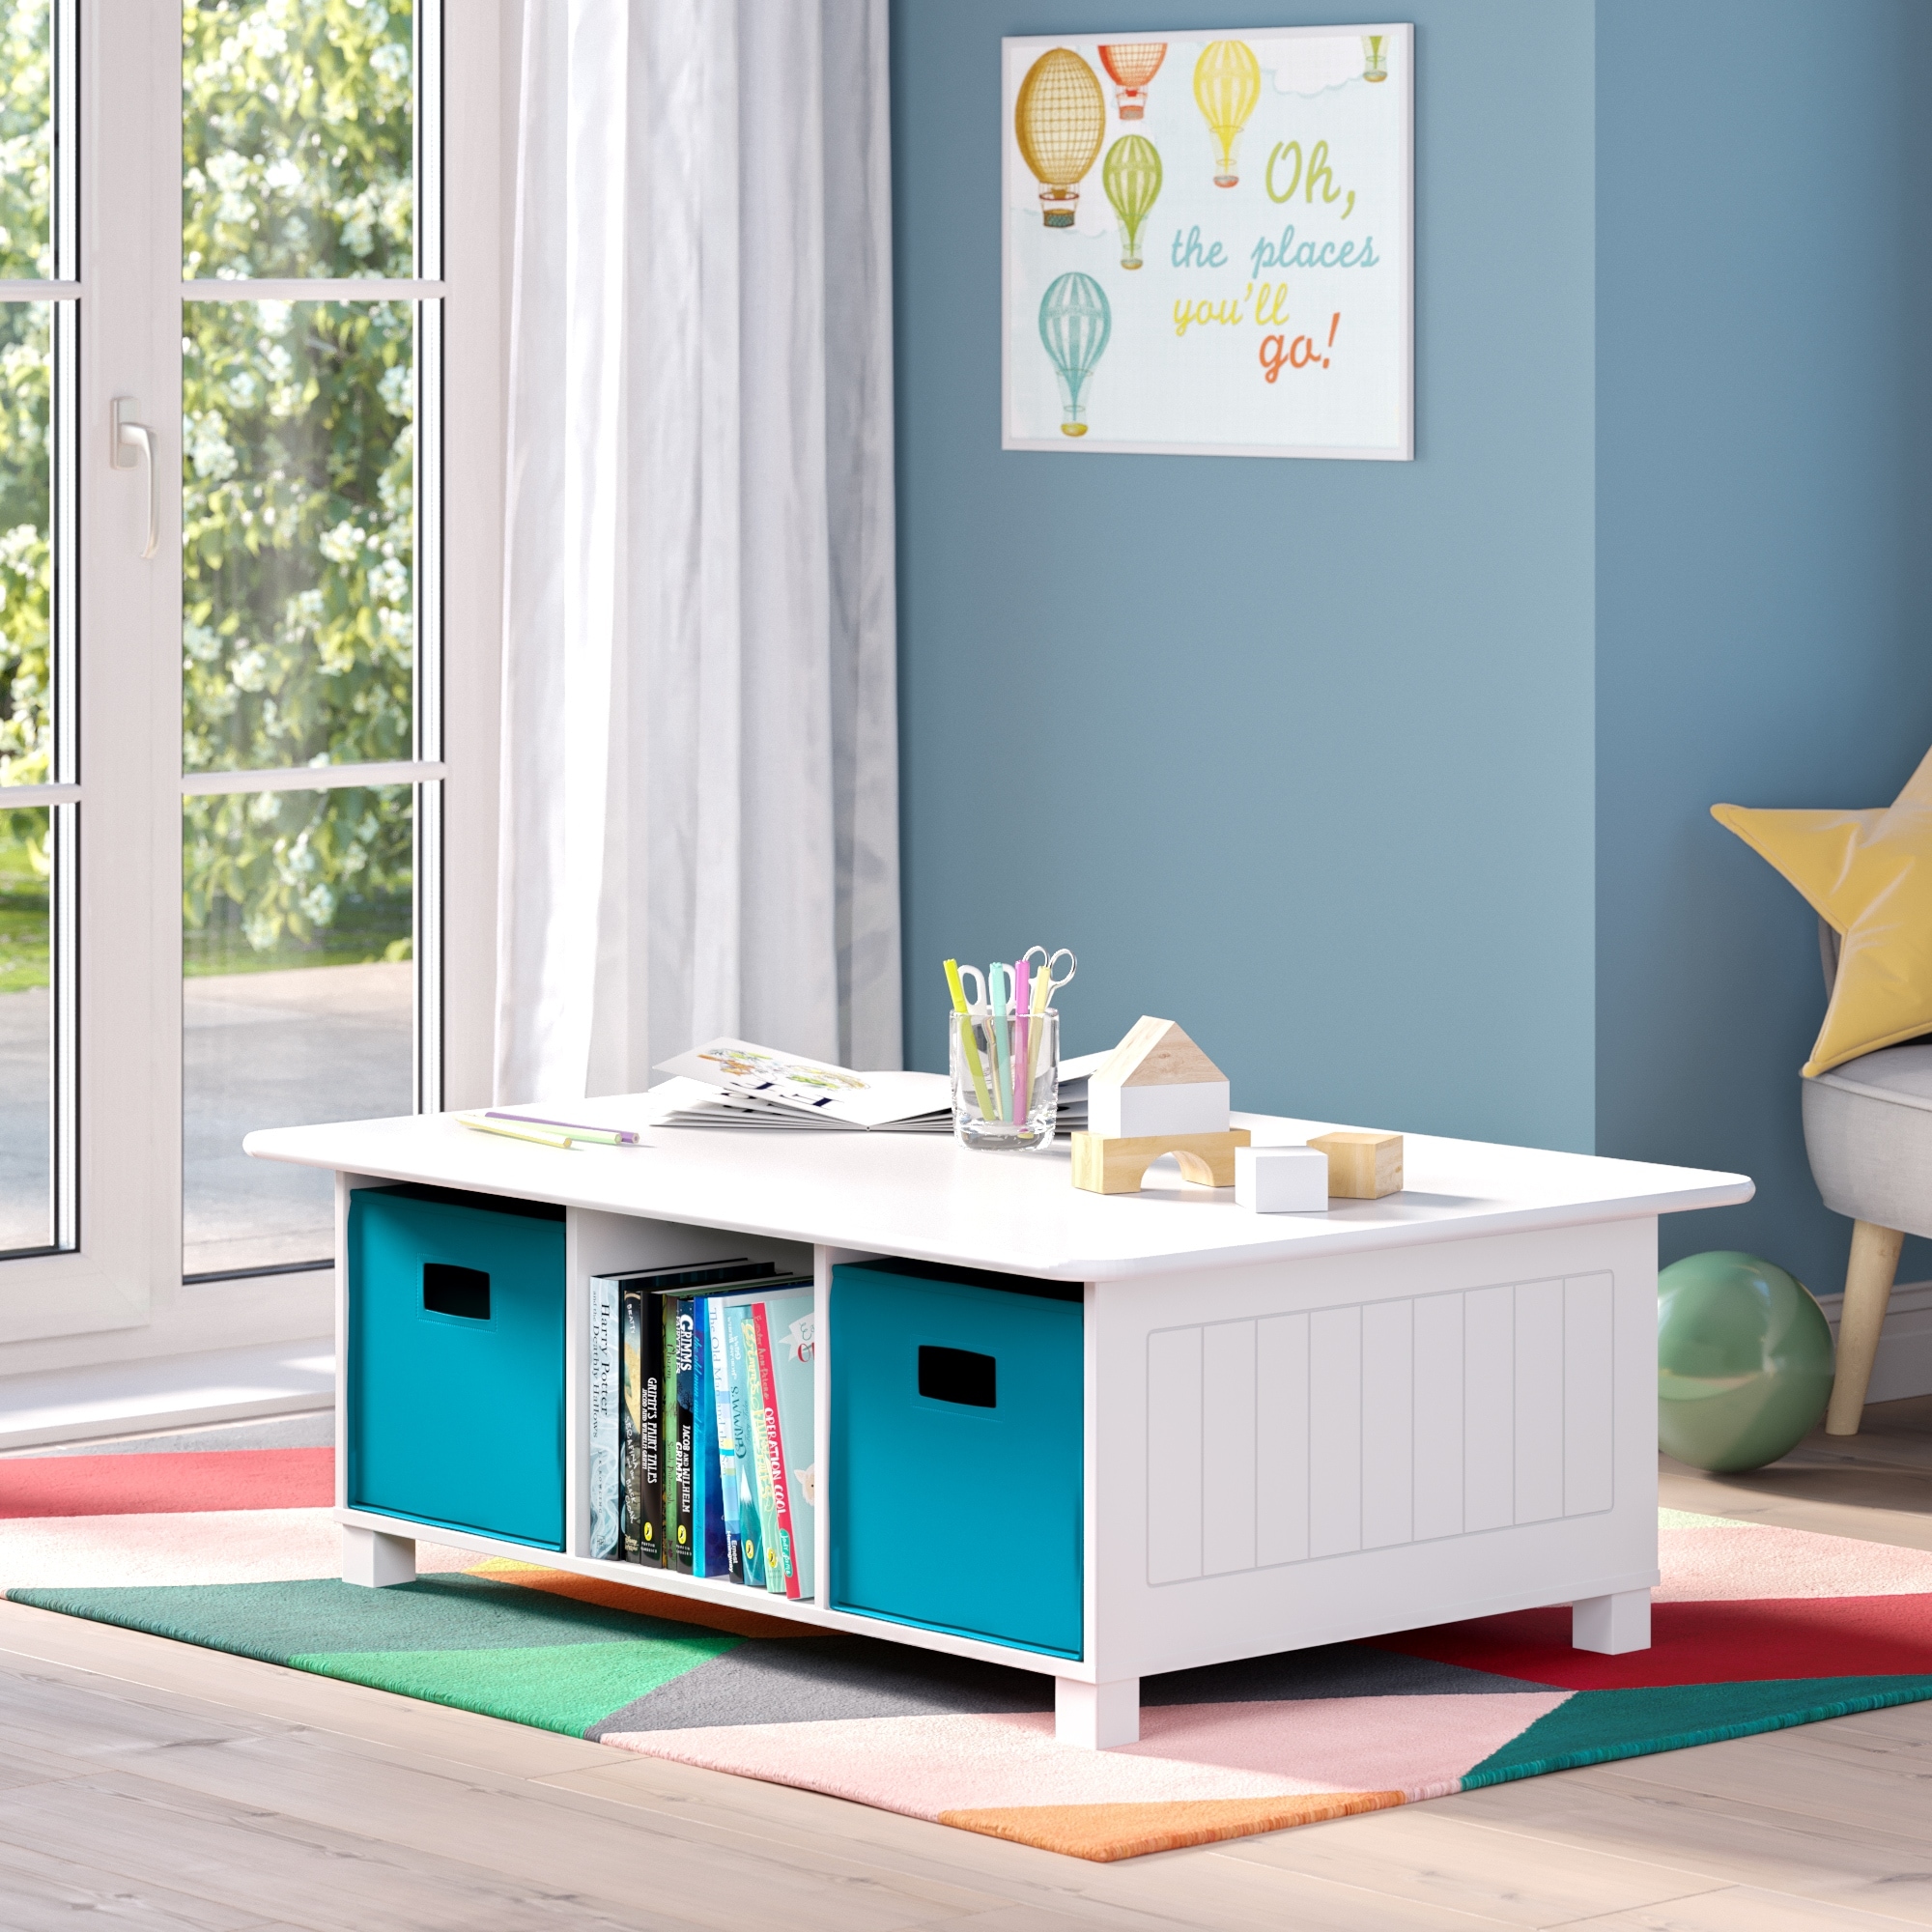 https://ak1.ostkcdn.com/images/products/is/images/direct/b431ecb3f092675efb2dfcb51e569aba3b78bccd/Kids-6-Cubby-Storage-Activity-Table-with-Optional-Bins.jpg